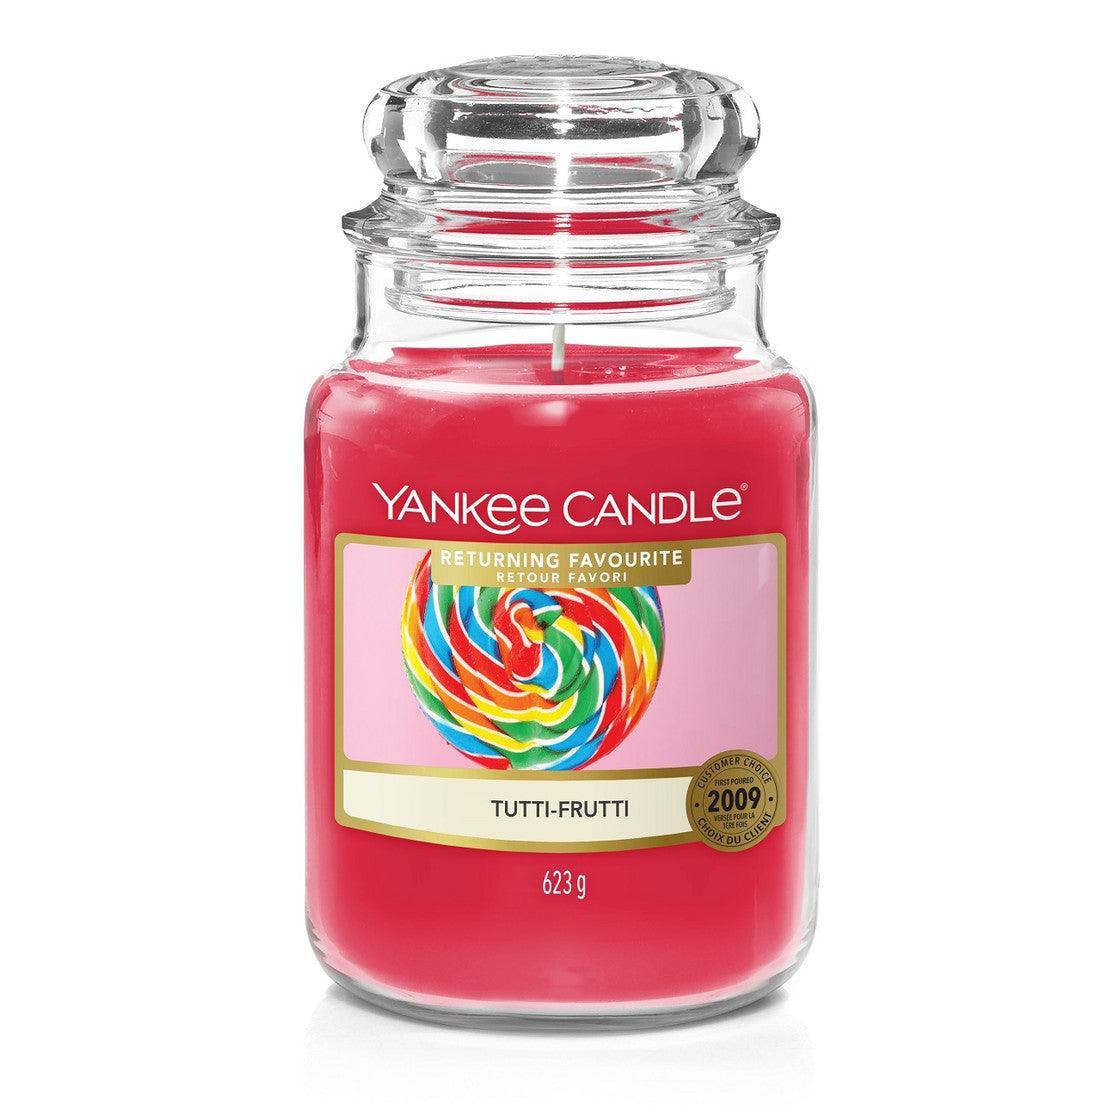 Yankee Candle Tutti Frutti | Large Jar 623g | Burn Time: Up to 150 Hours - Choice Stores